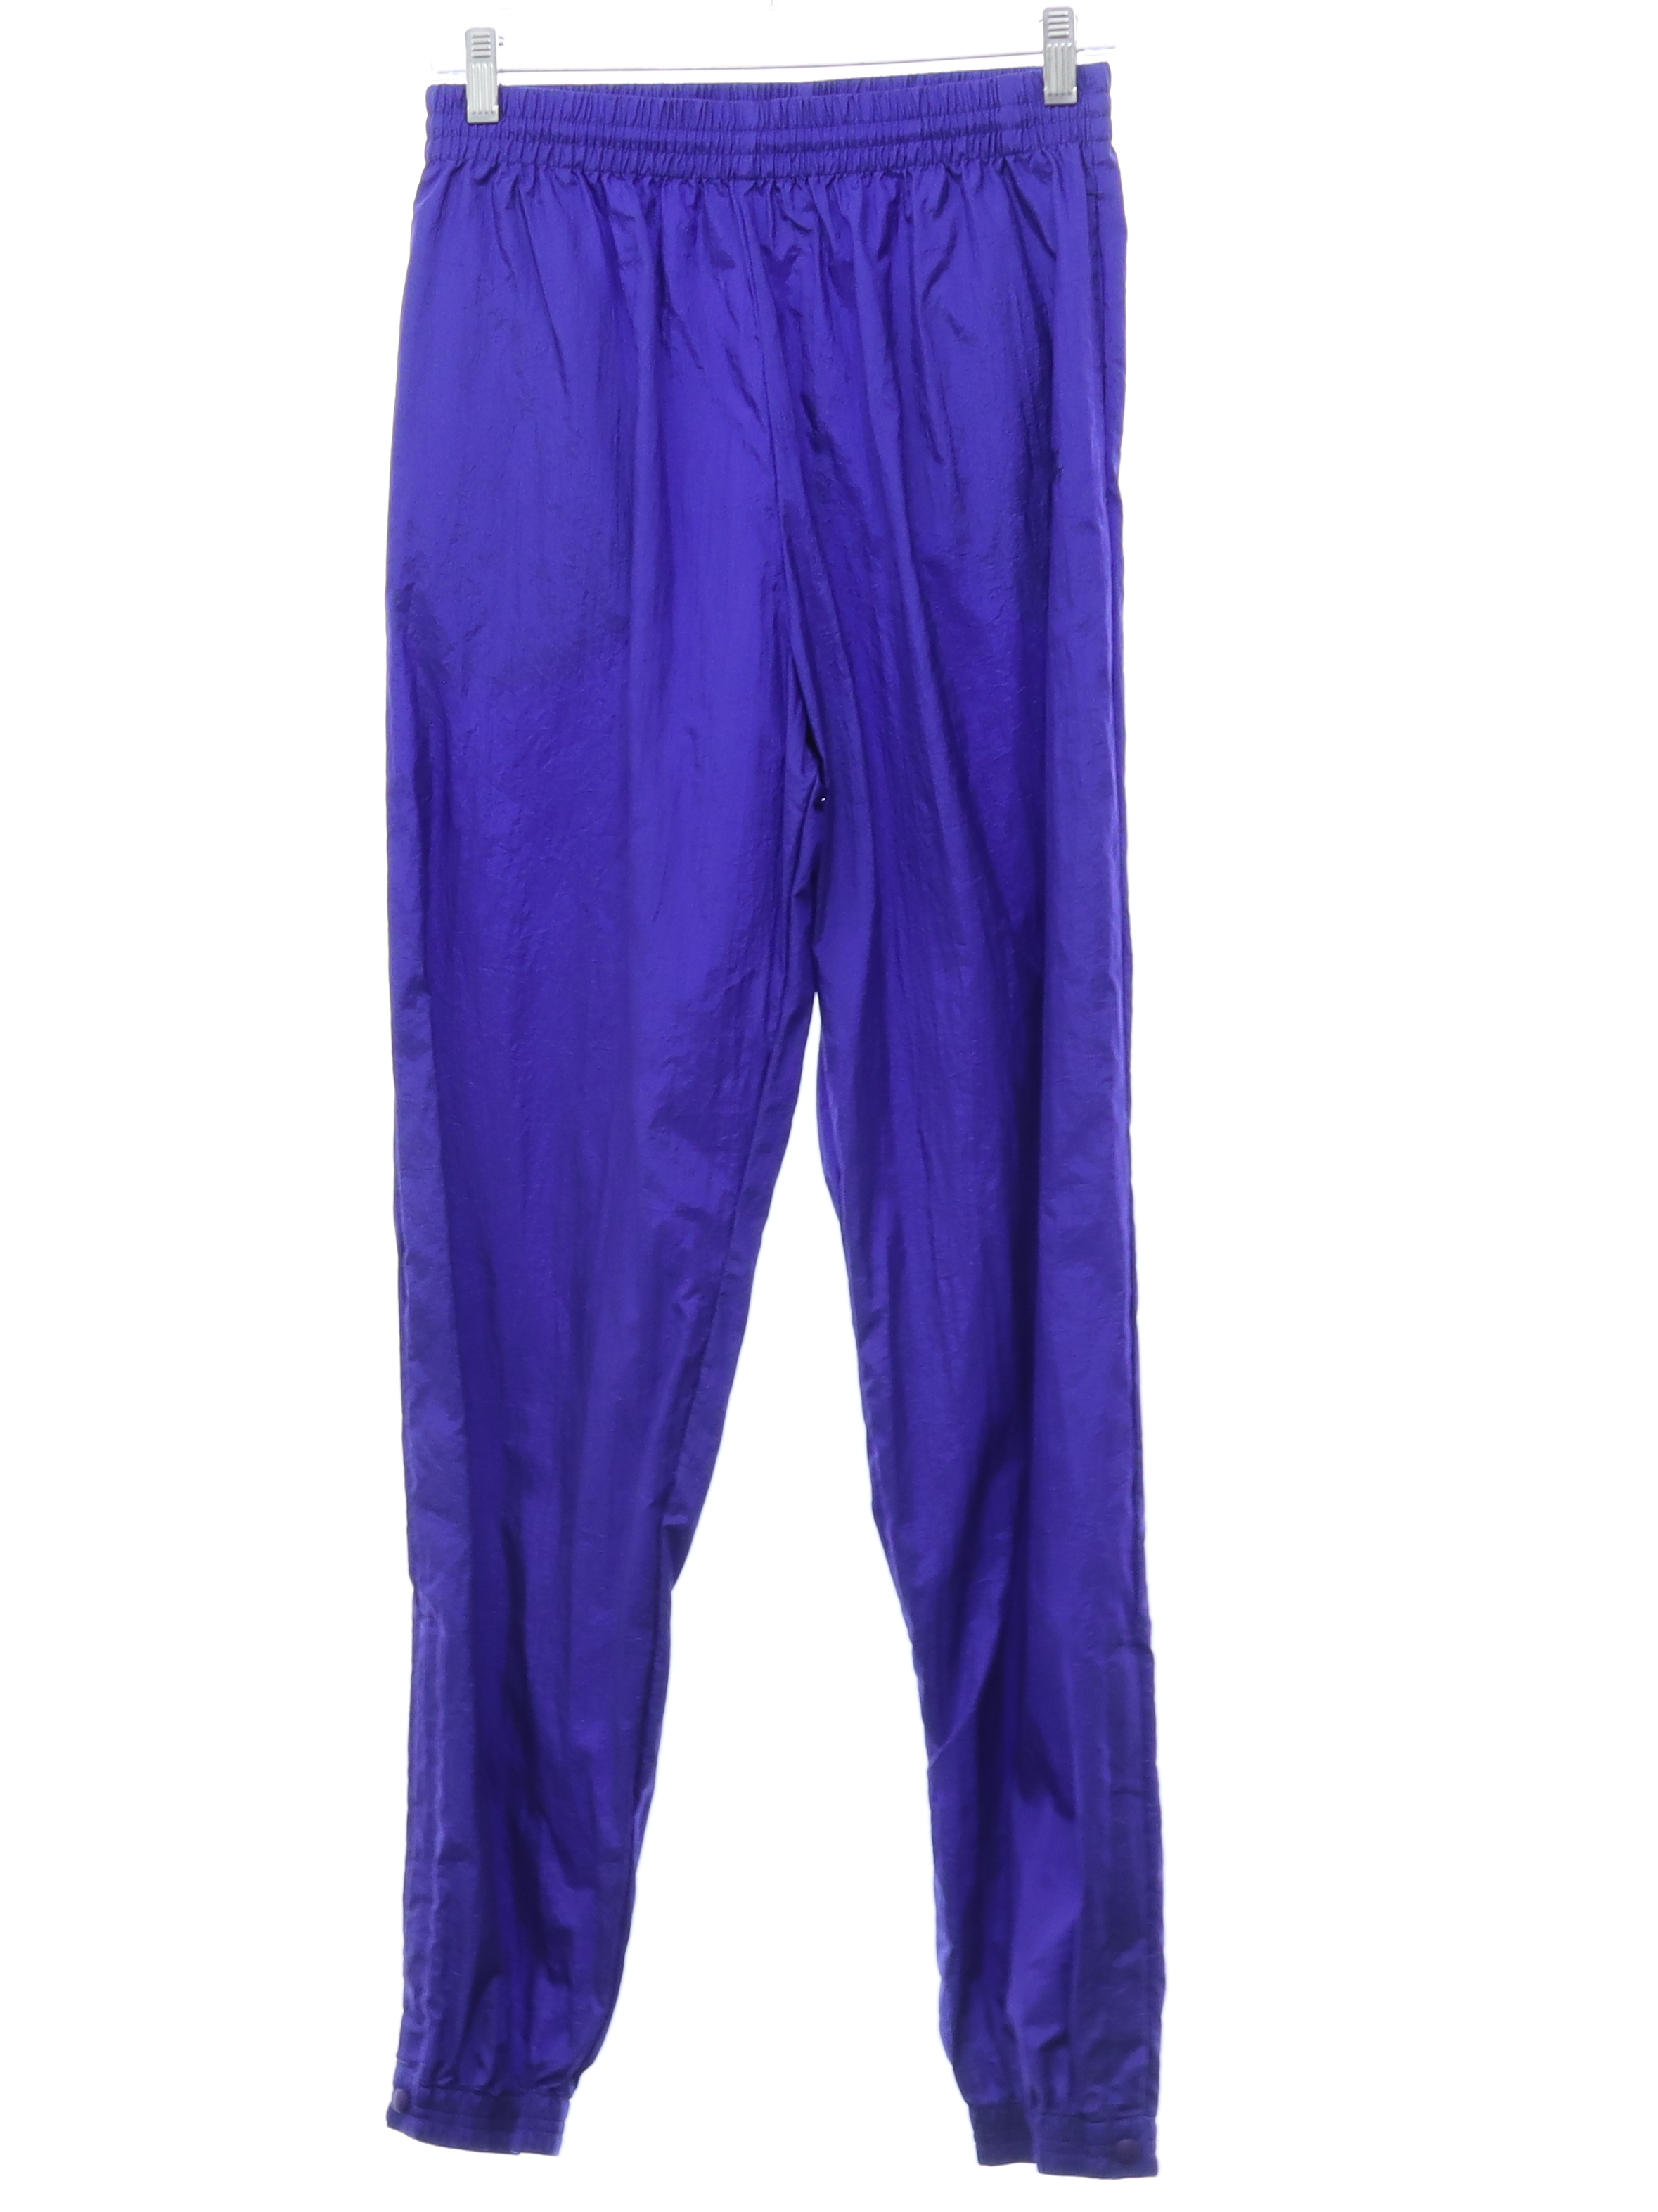 Retro 80s Pants (Moving Comfort) : 80s style (made recently) -Moving  Comfort- Womens sheeny royal blue crinkled nylon shell track pants. Elastic  pull on waistband with inside front drawstring ties, vertical entry